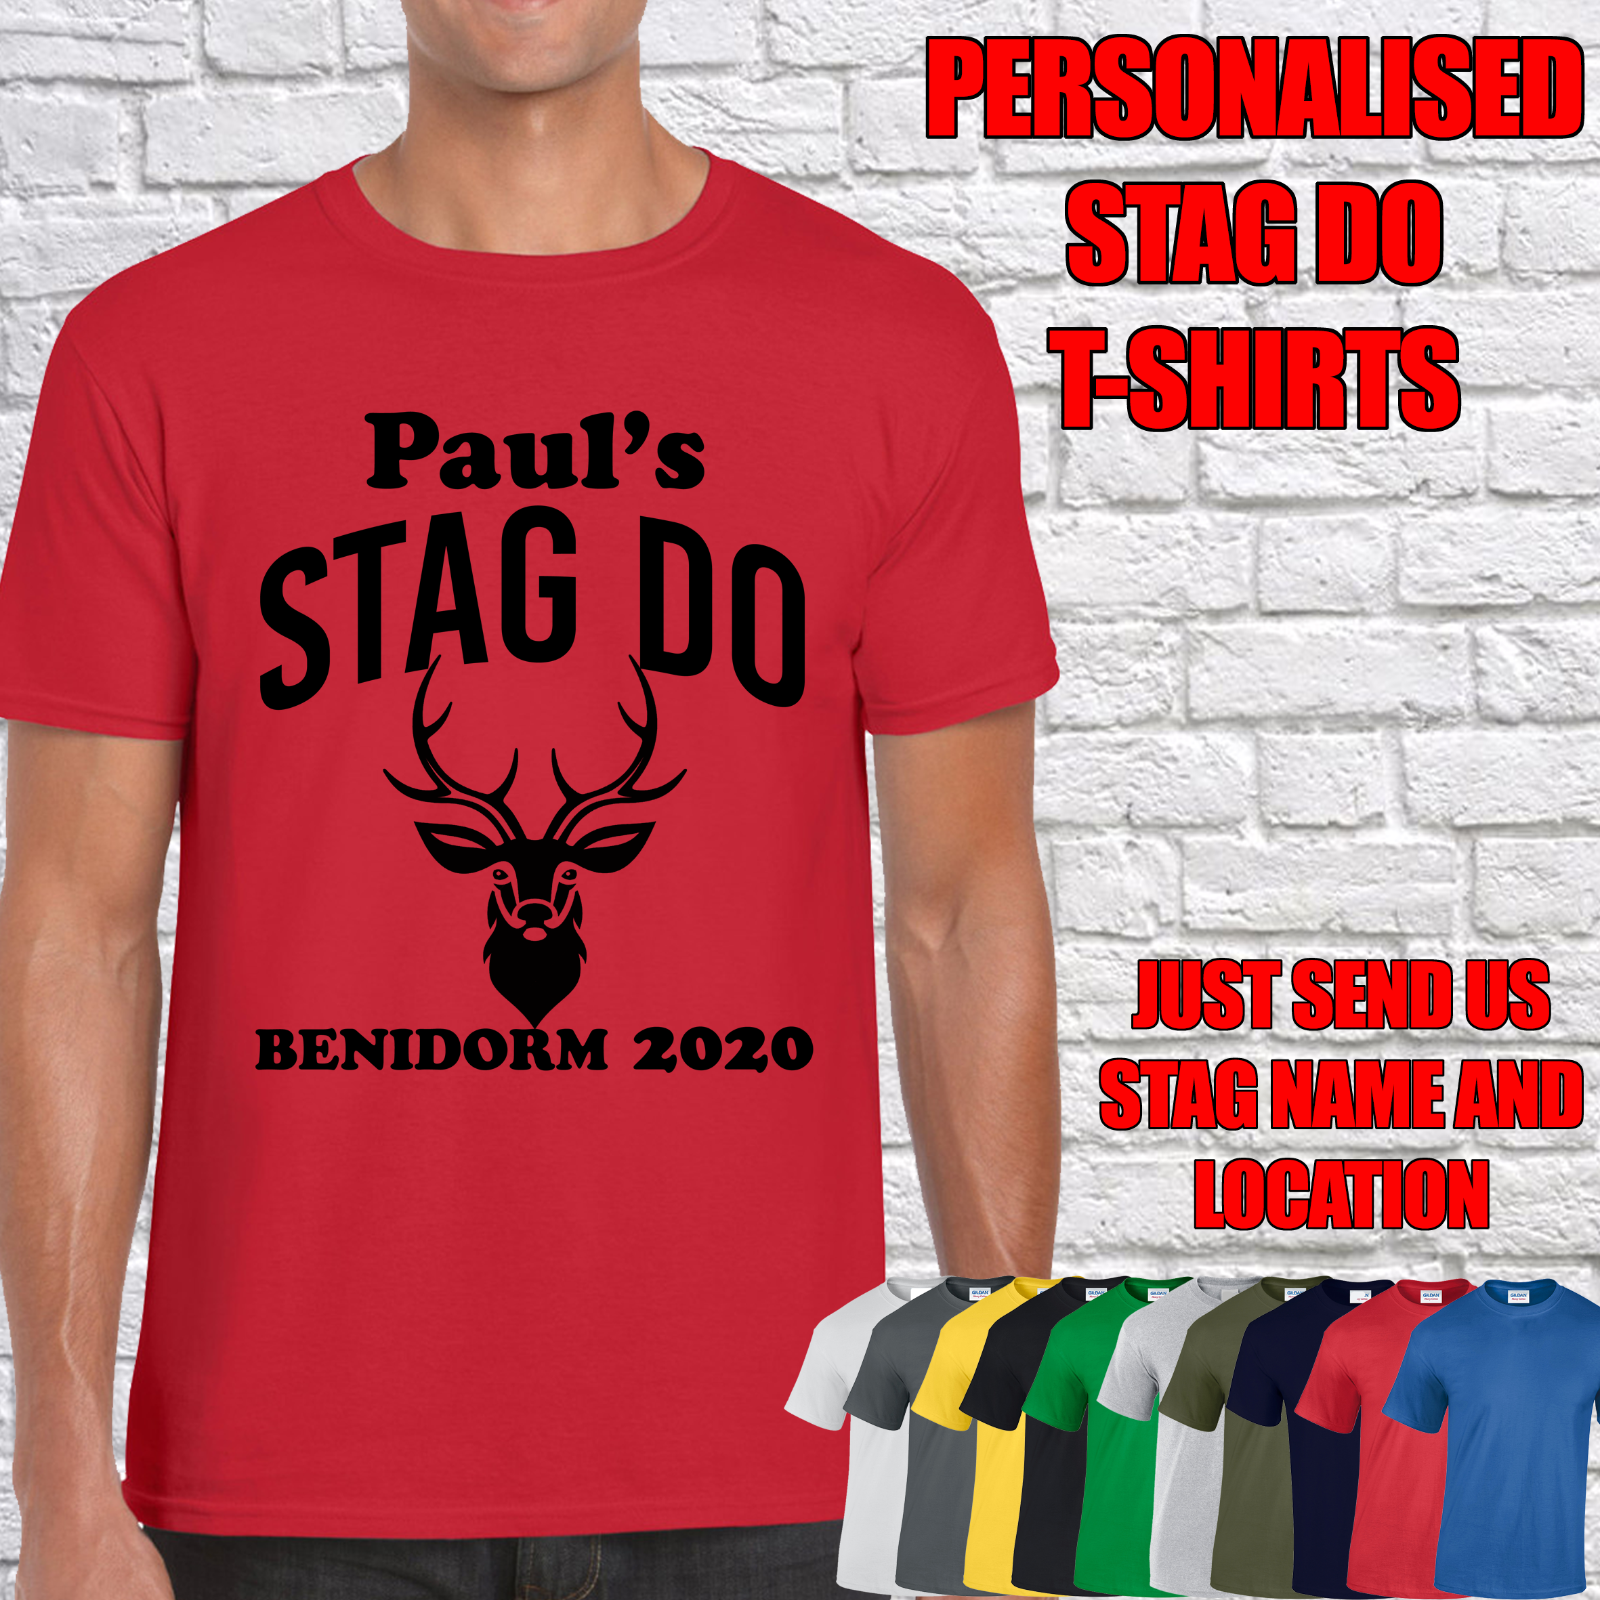 STAG DO T-SHIRTS MENS STAG PARTY T SHIRT TOPS UNISEX FUNNY PERSONALISED  PRINT D9 | eBay